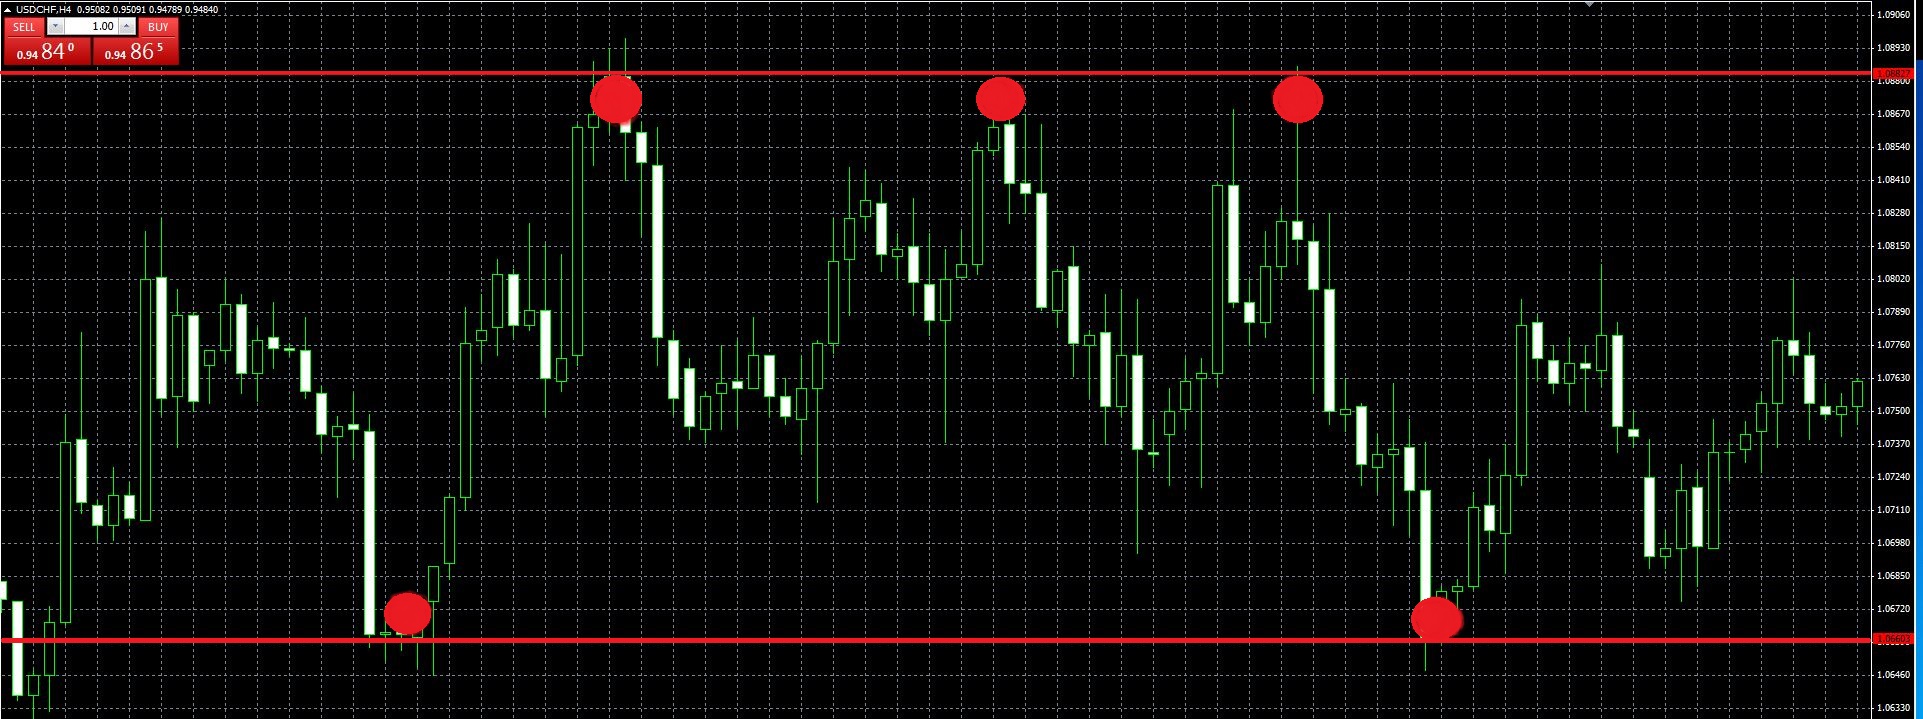 The best strategy for binary options